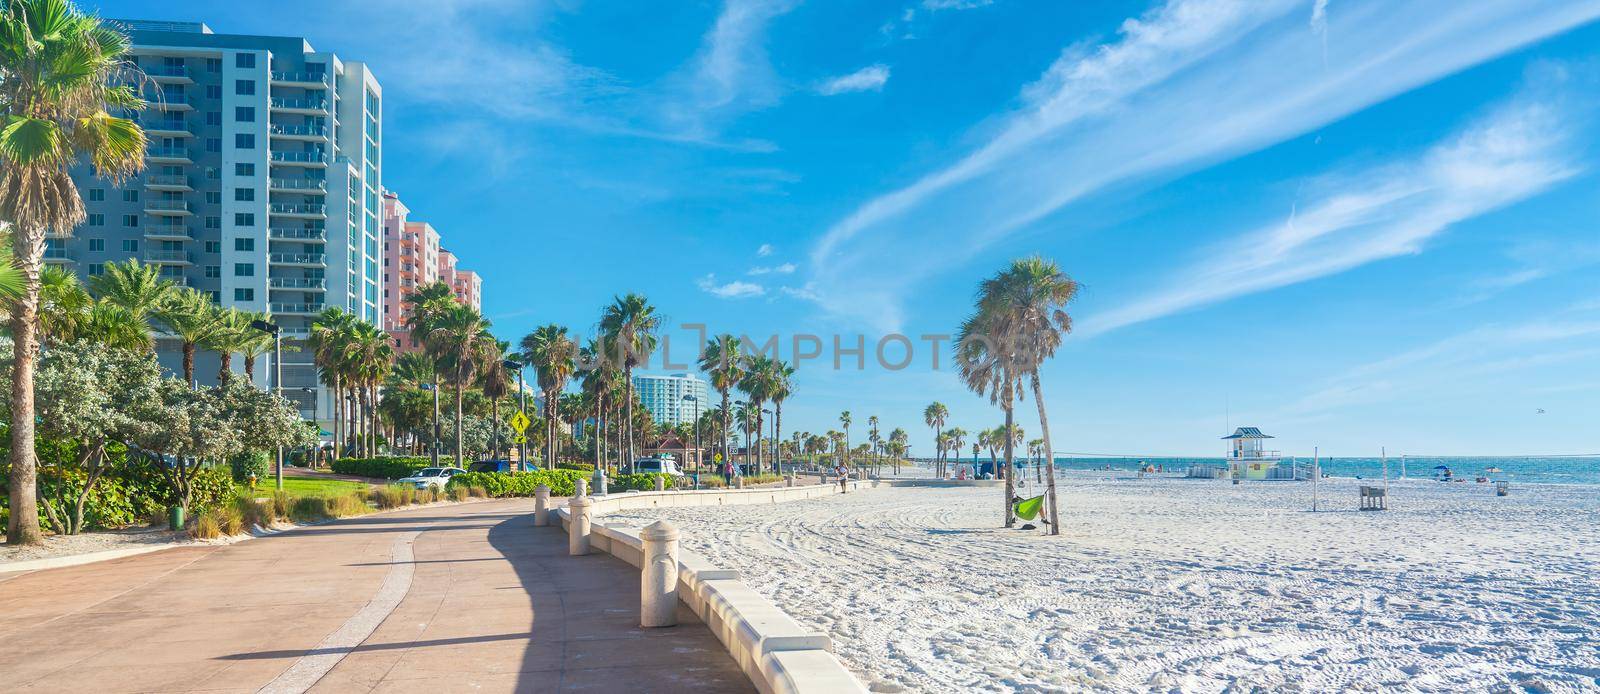 Beautiful Clearwater beach with white sand in Florida USA by Mariakray